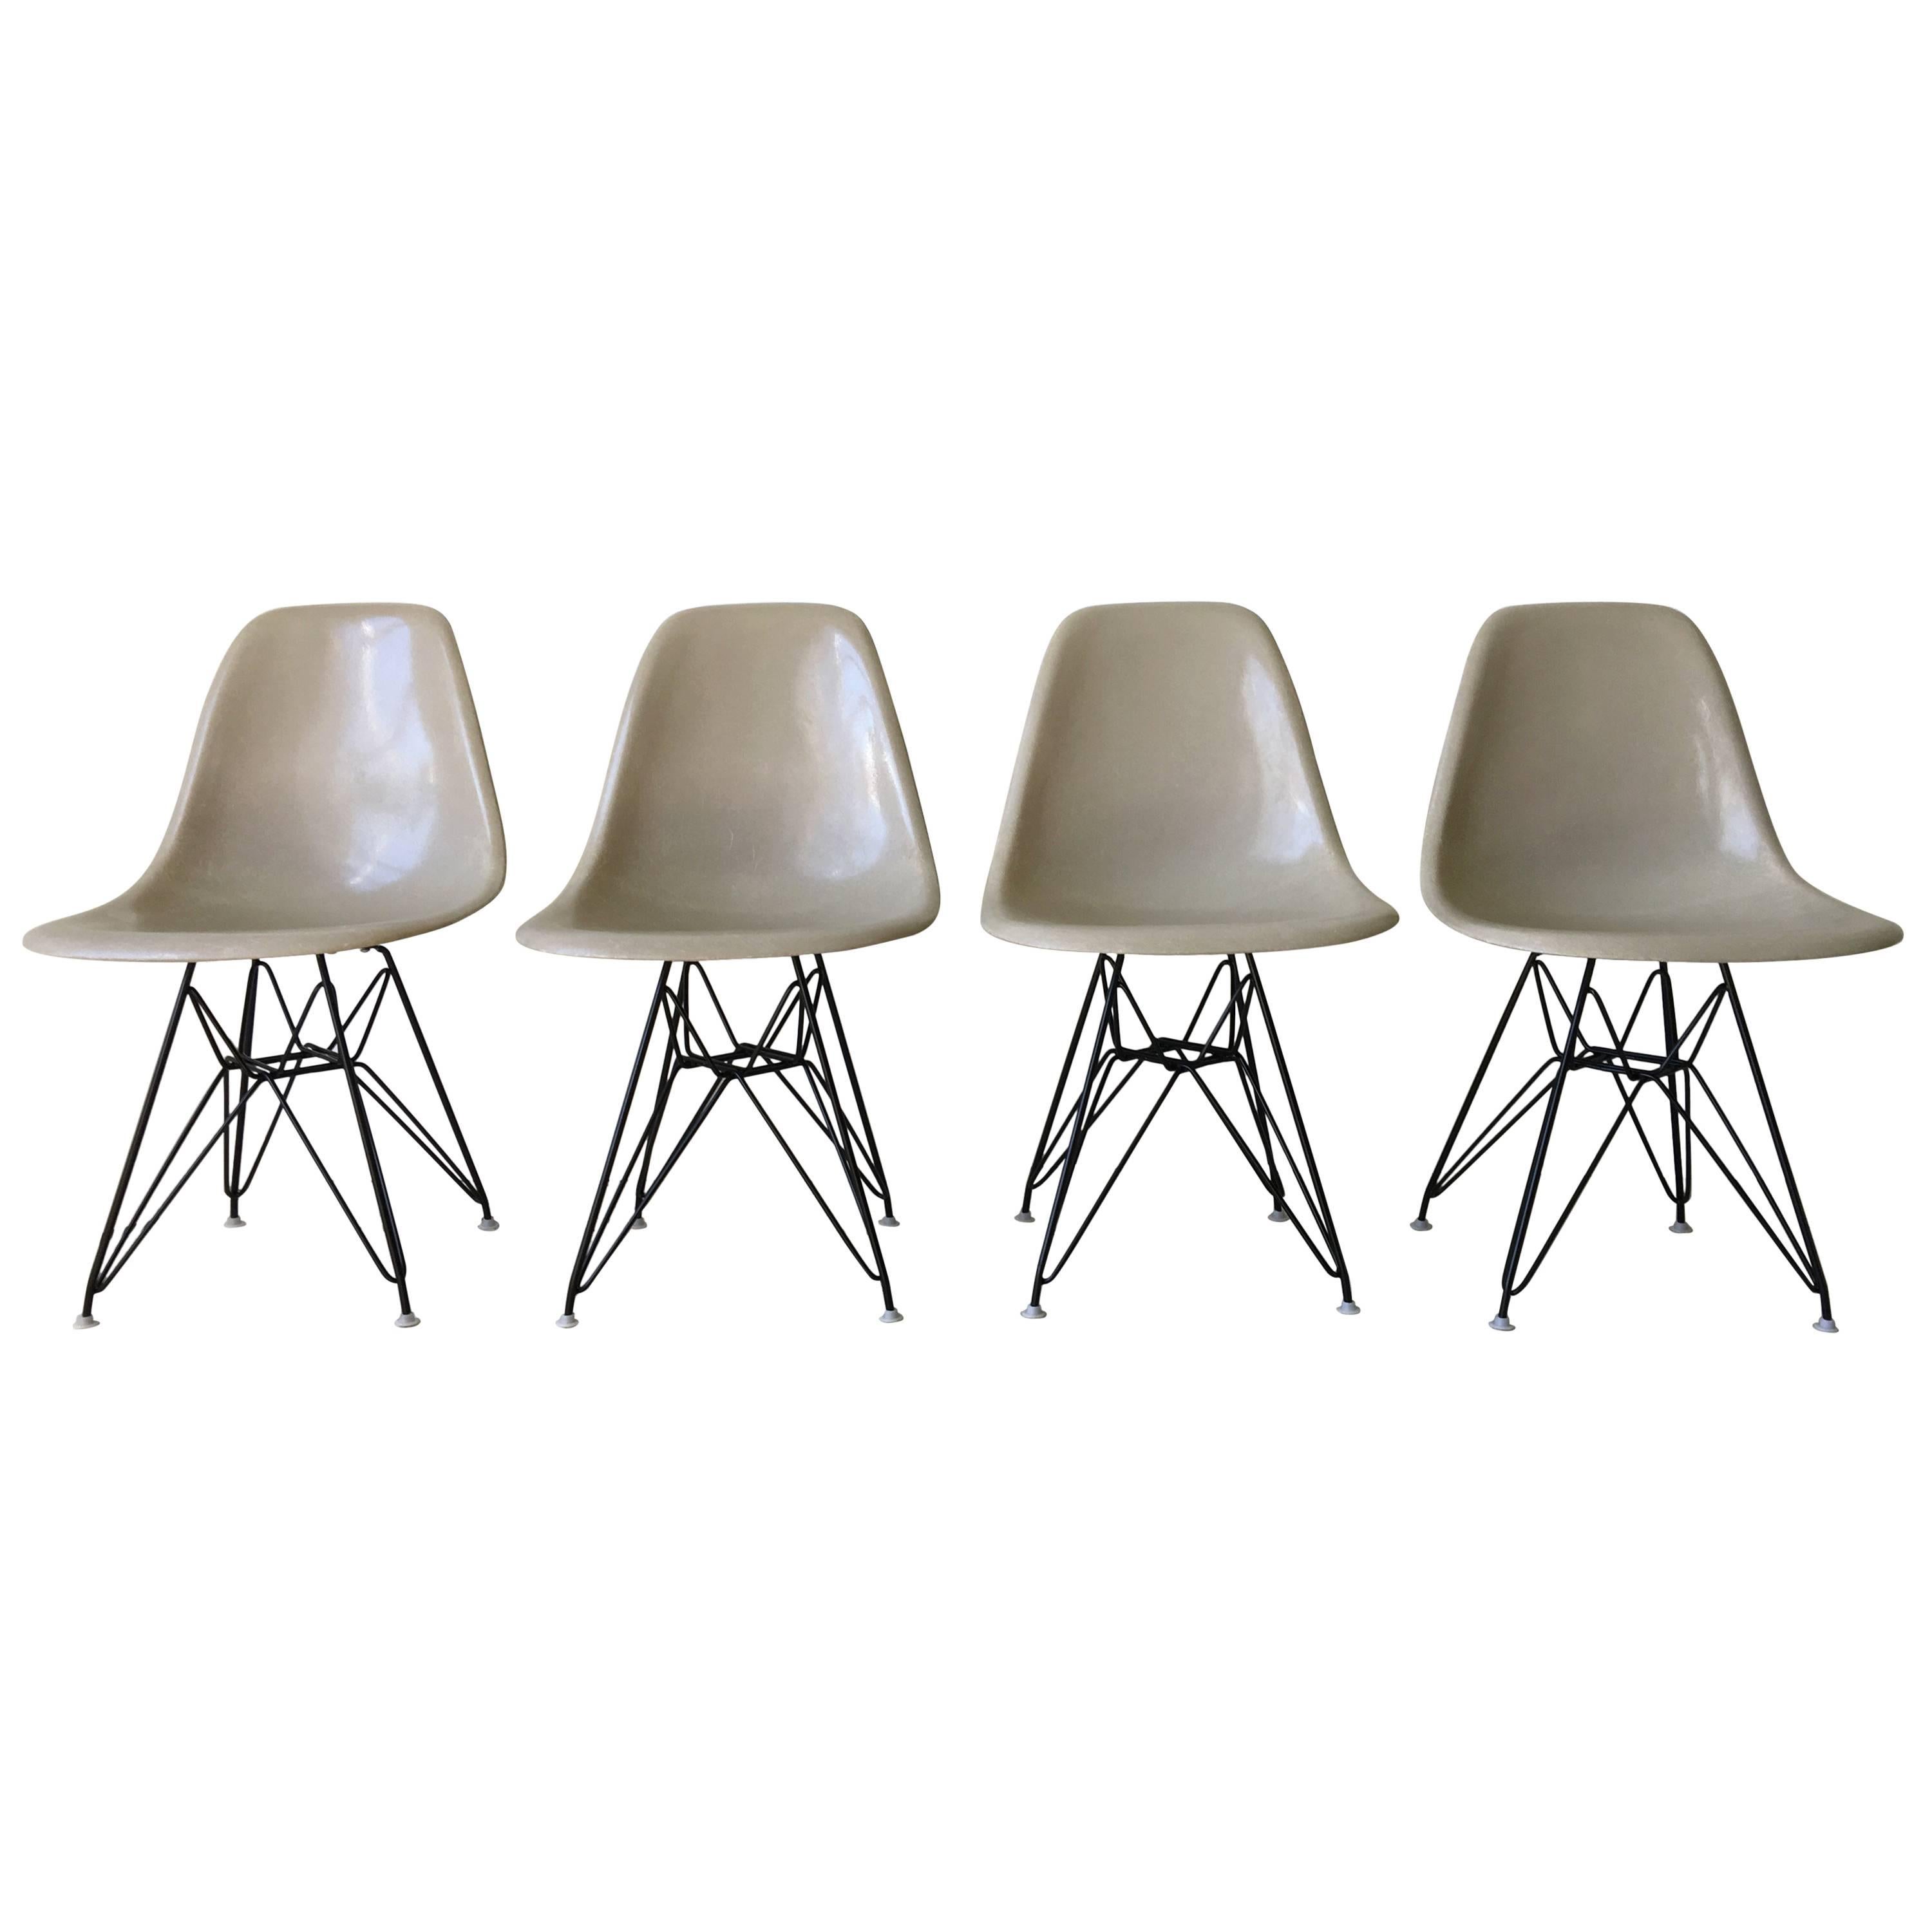 Charles Eames Set of Grey Fiberglass Eiffel Tower Base Chairs for Herman Miller